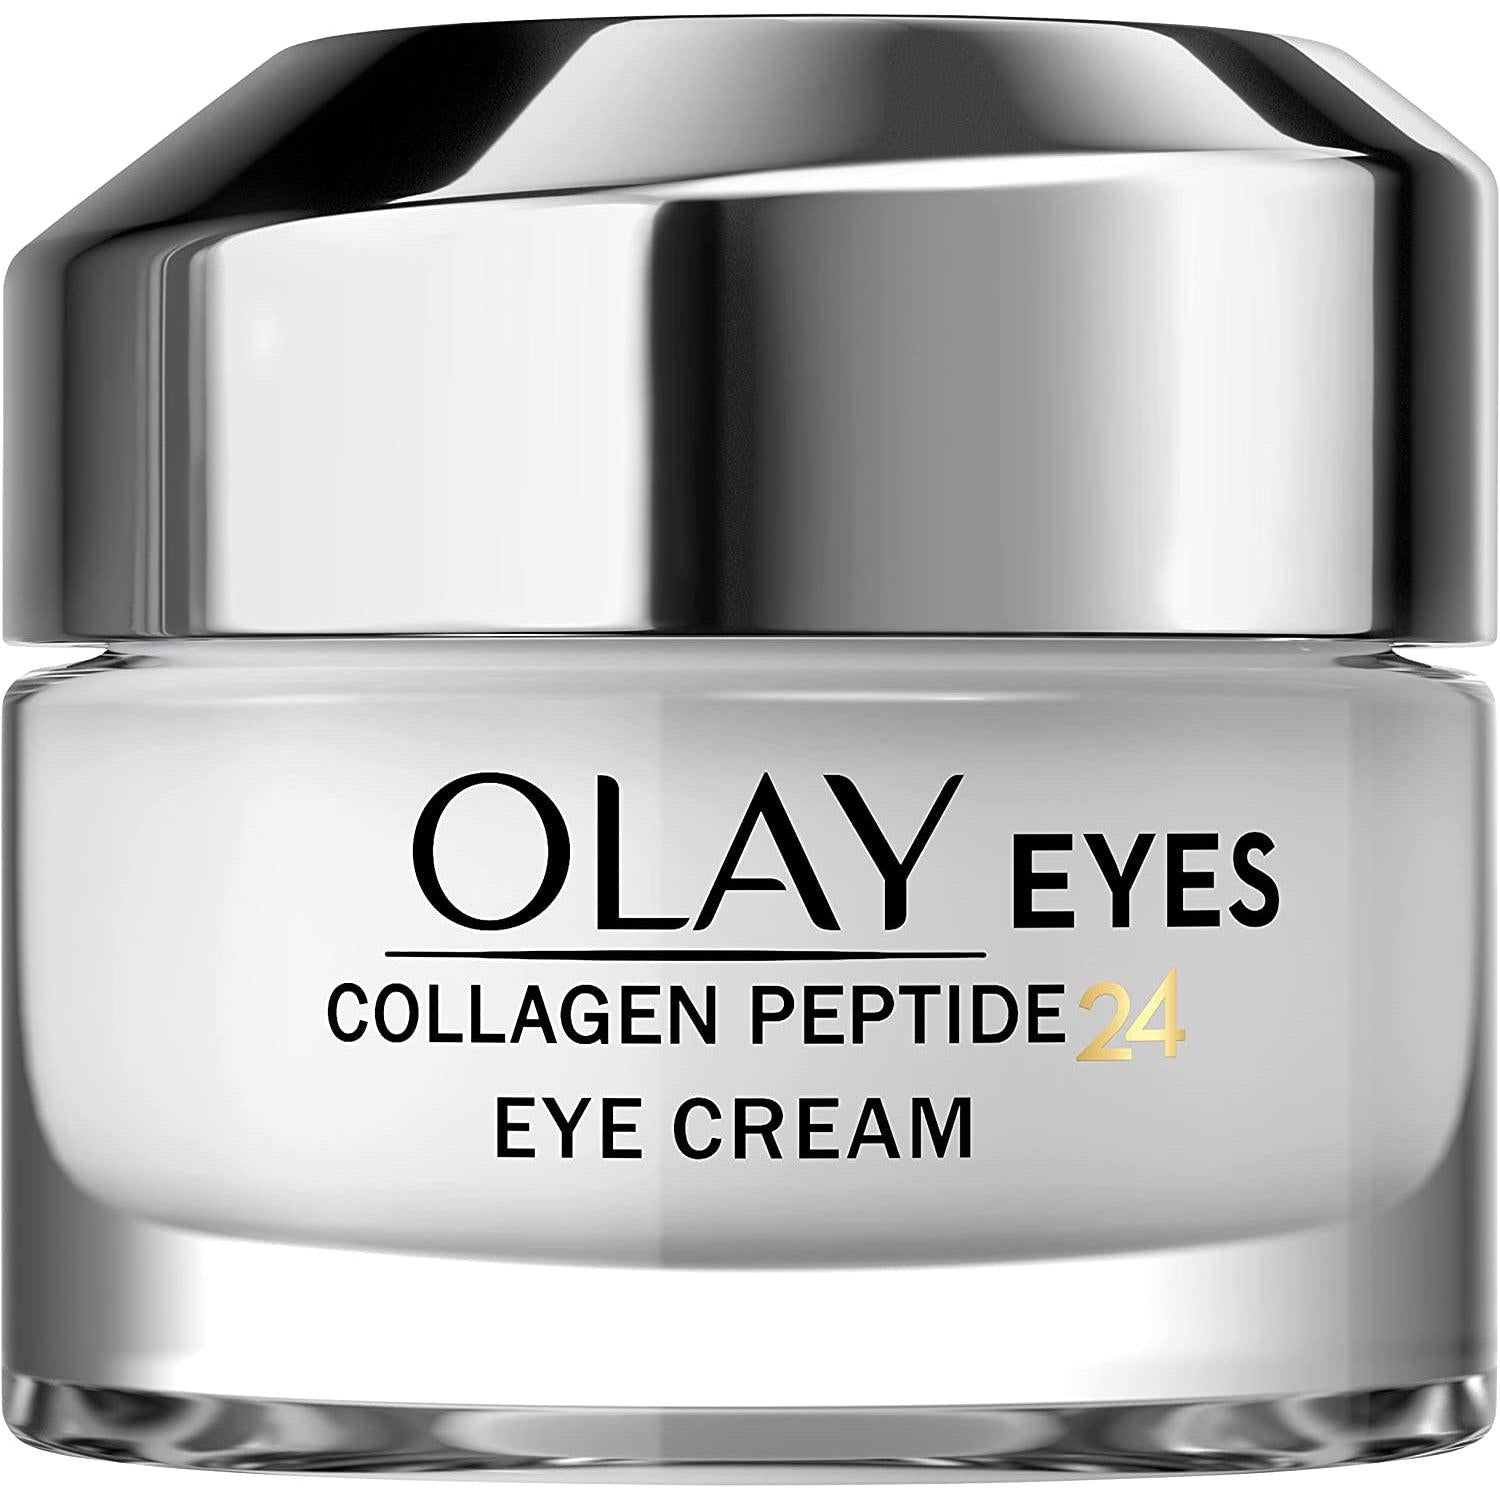 Olay Collagen Peptide 24 Eye Cream, Olay's Highest Concentration In Collagen Peptides, Anti-Ageing, Firming Eye Cream, 15 ml - Healthxpress.ie